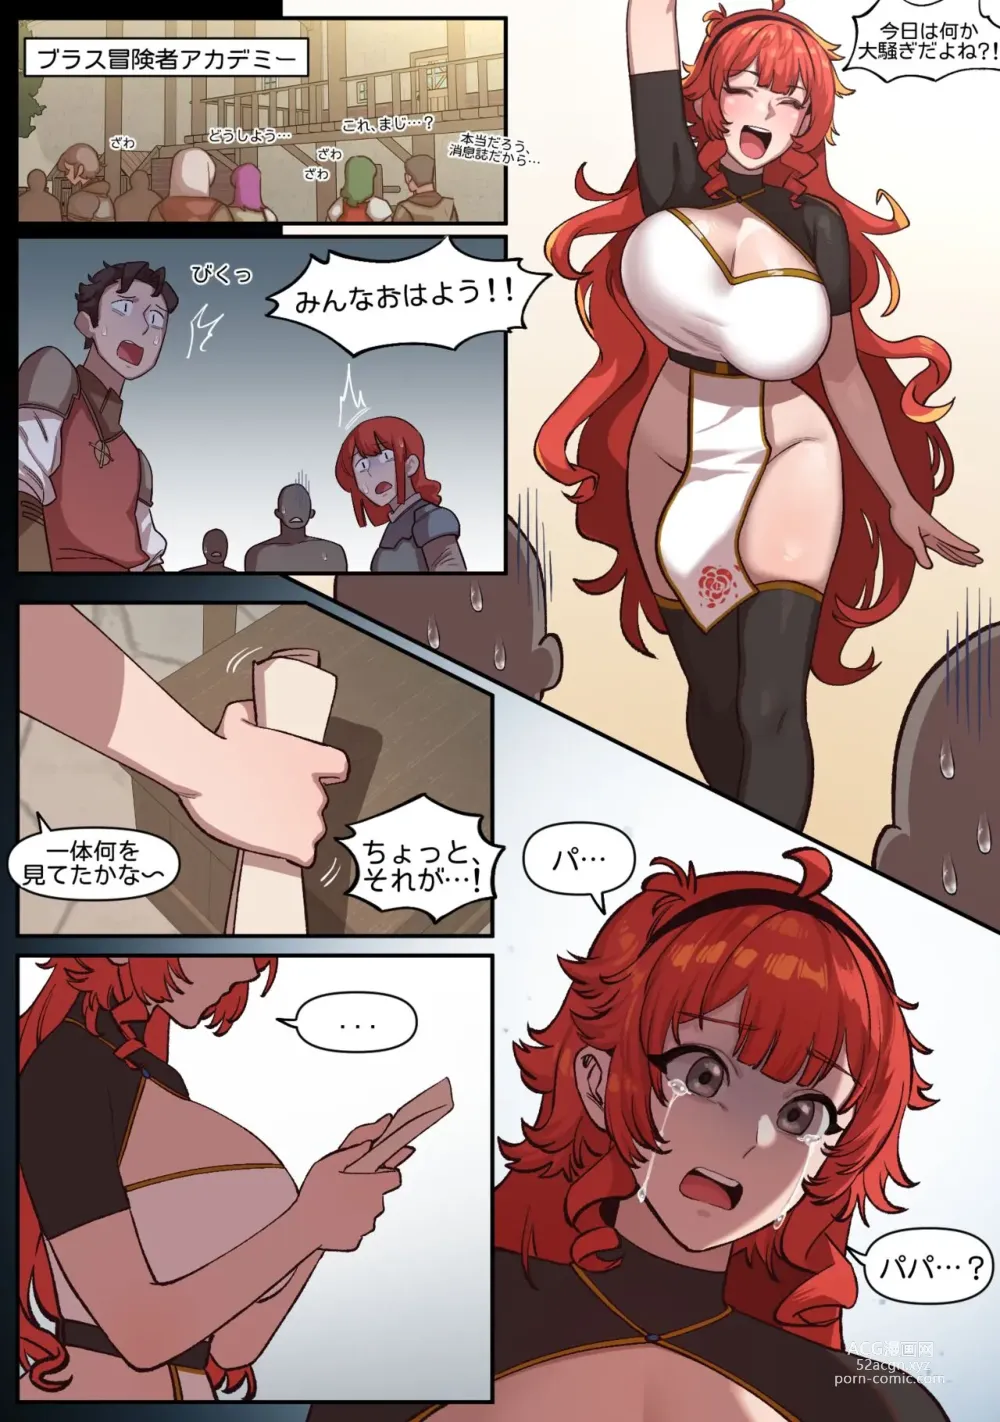 Page 11 of doujinshi Knight of the Fallen Kingdom 3 (uncensored)